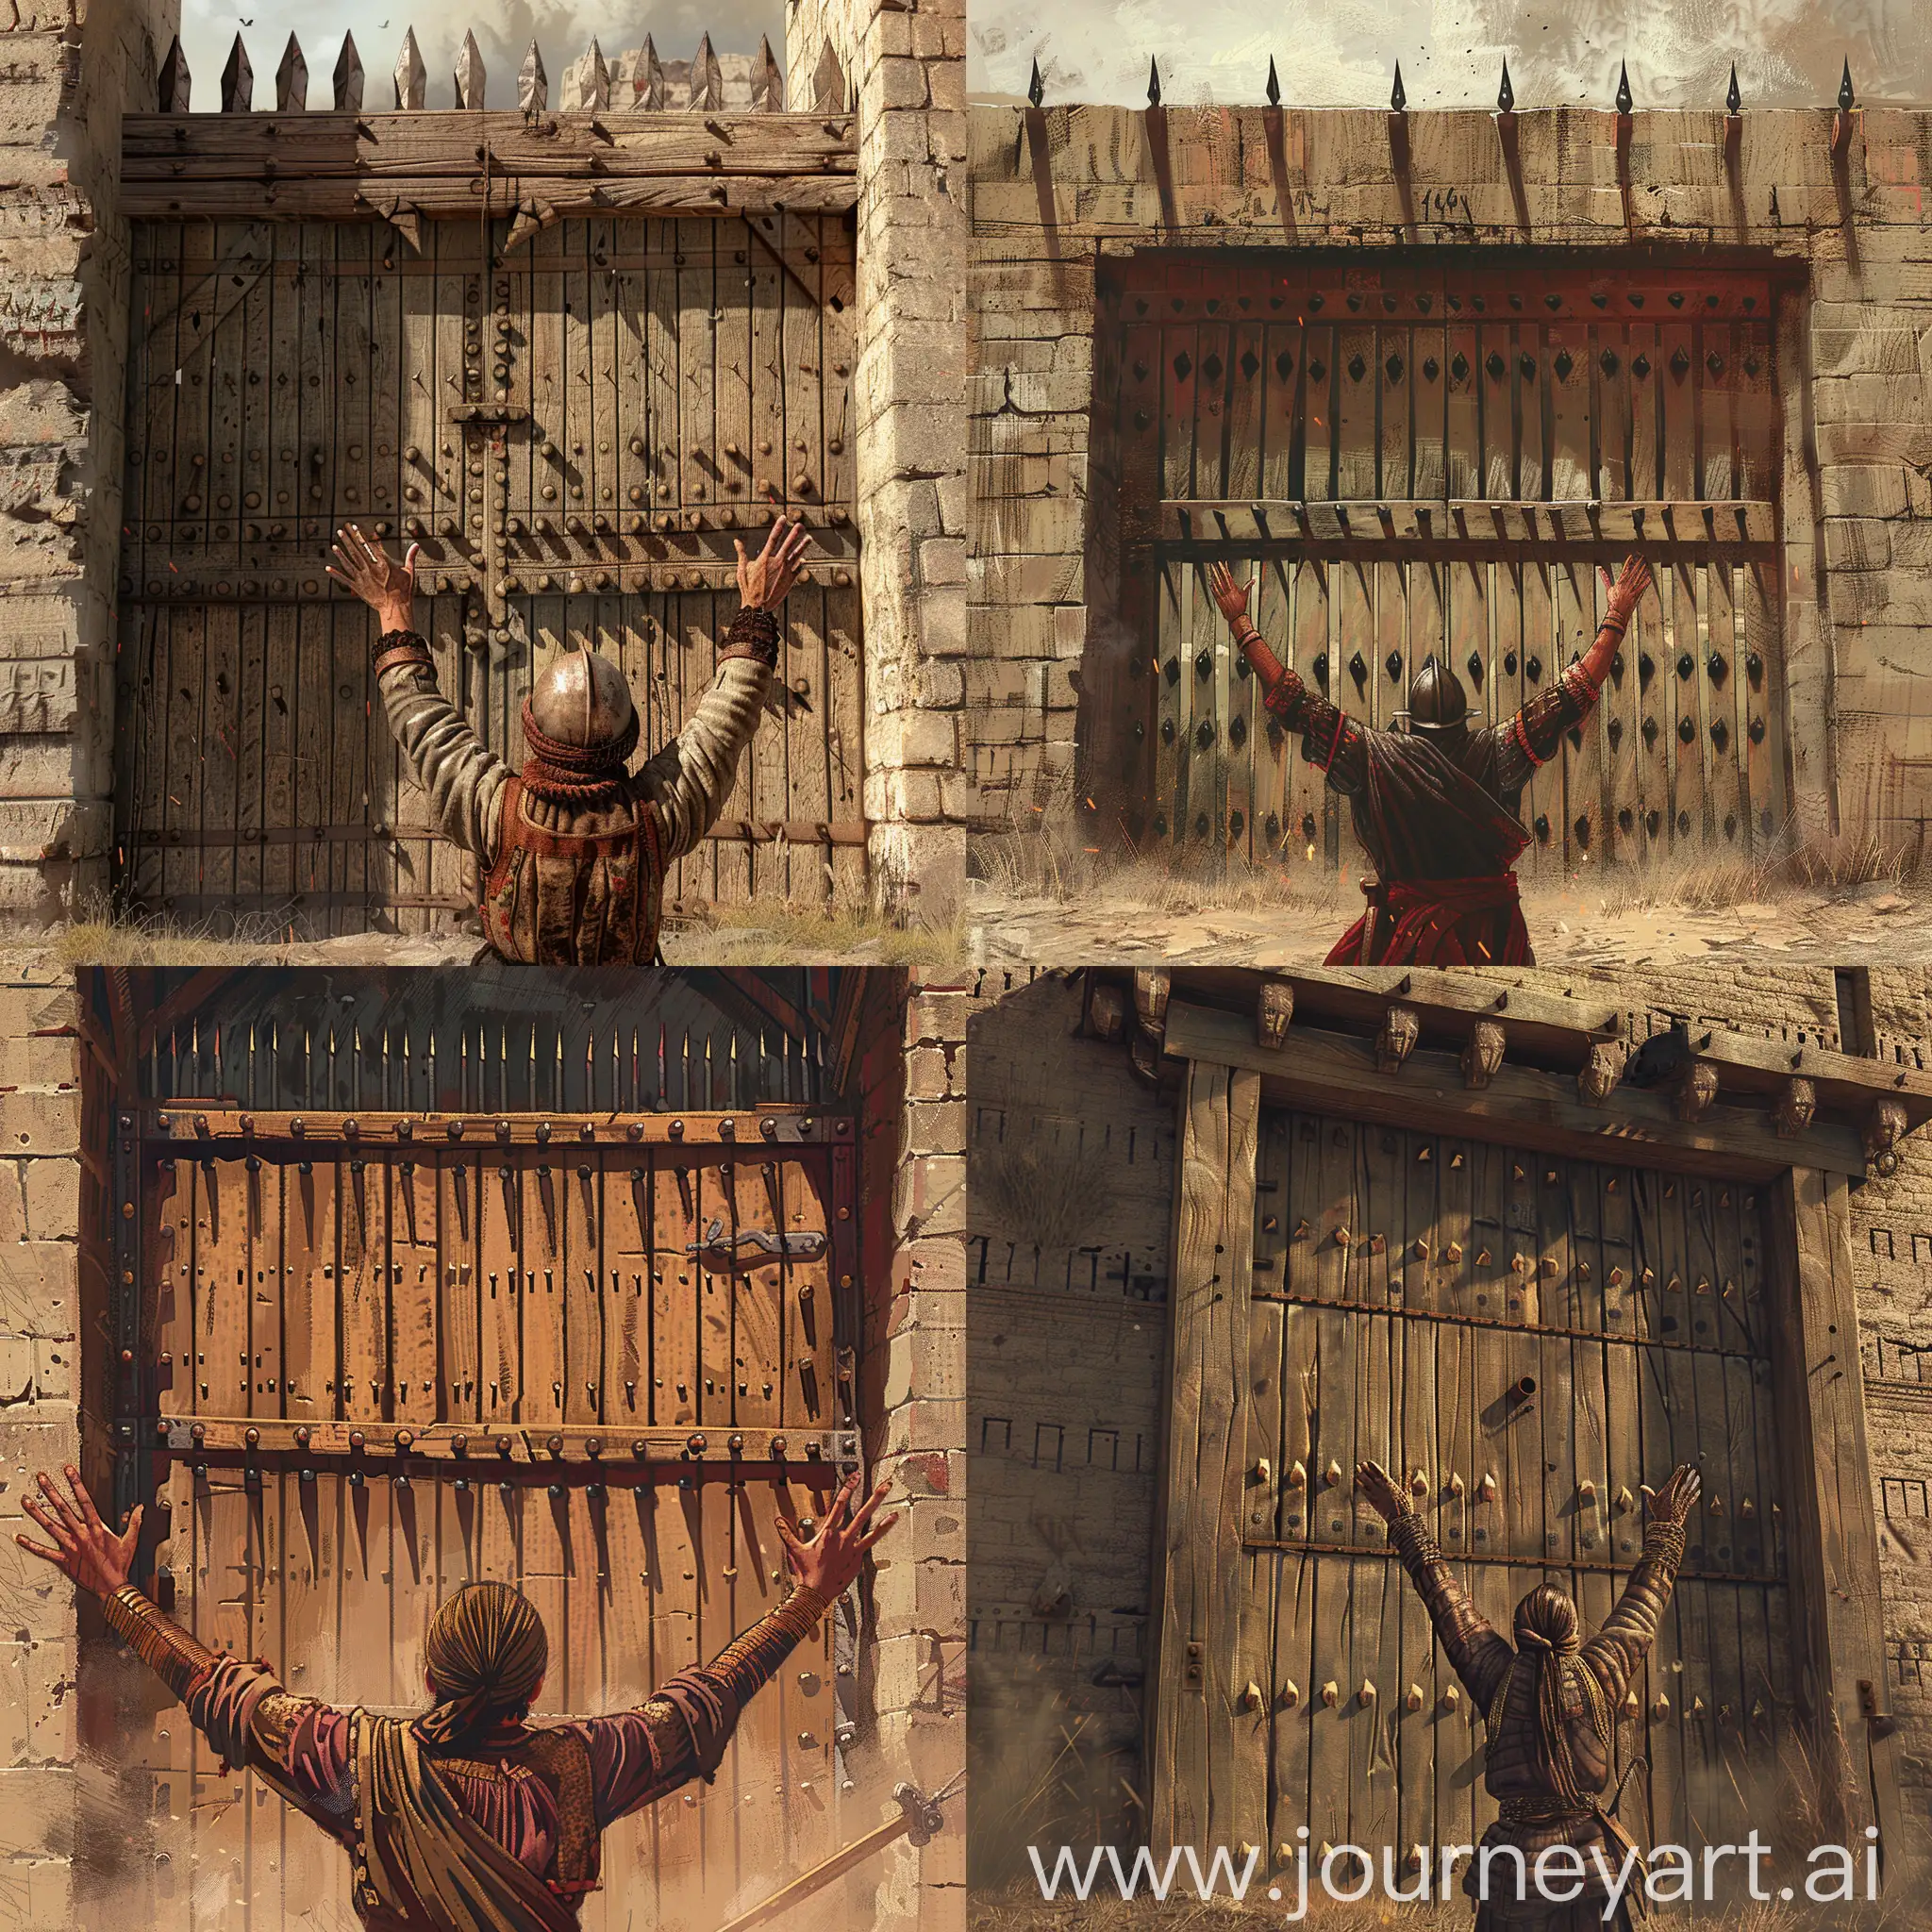 The year is 1498 CE. A battle is going on between the rajput forces and sultanate. Imagine a rajput soldier with his hands raised standing in front of the wooden gate of a rajput fort with horizontal spikes on the gate. 